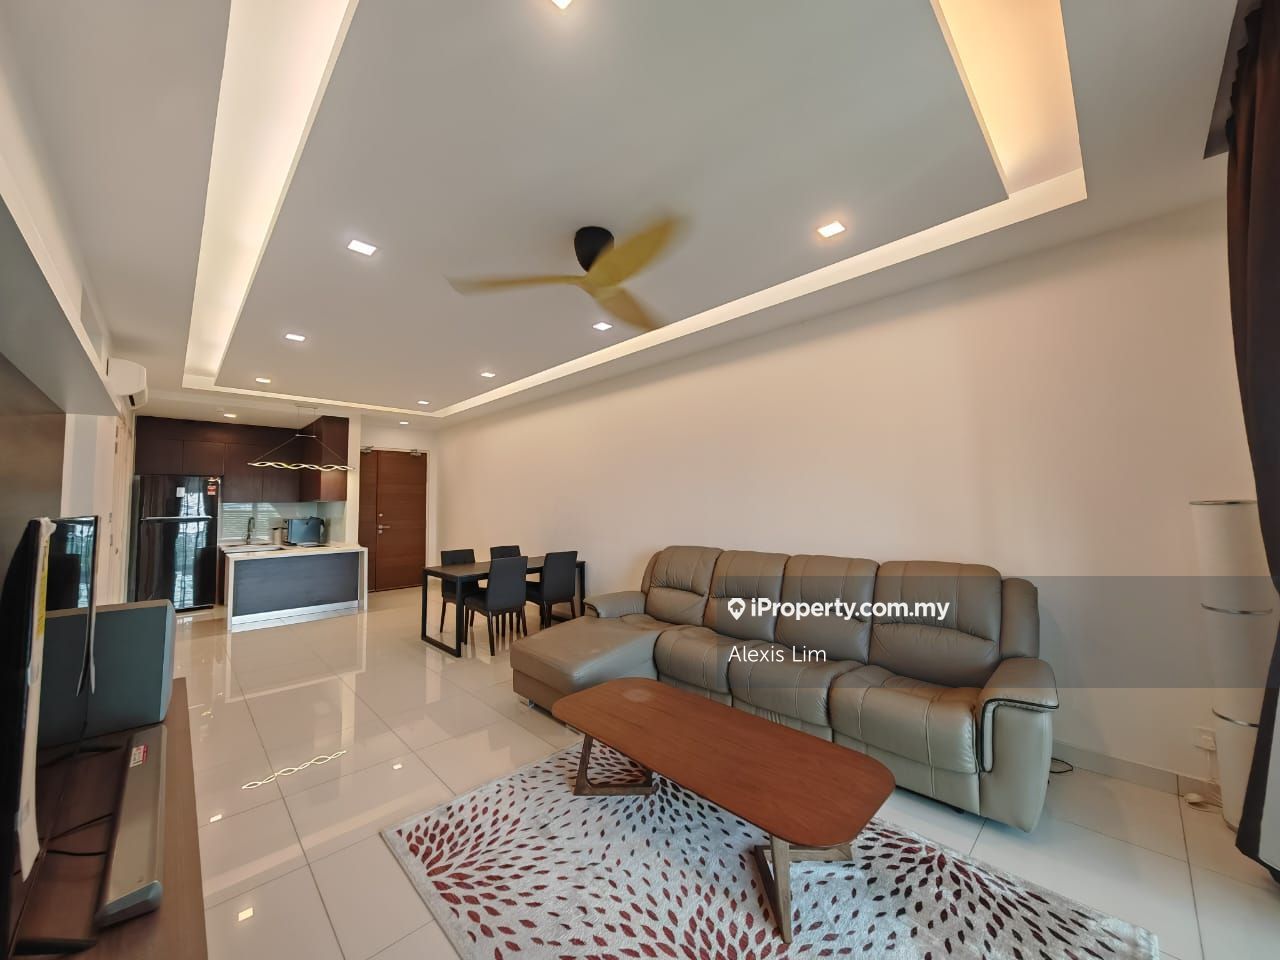 Isola Serviced Residence 3 bedrooms for rent in Subang Jaya, Selangor ...